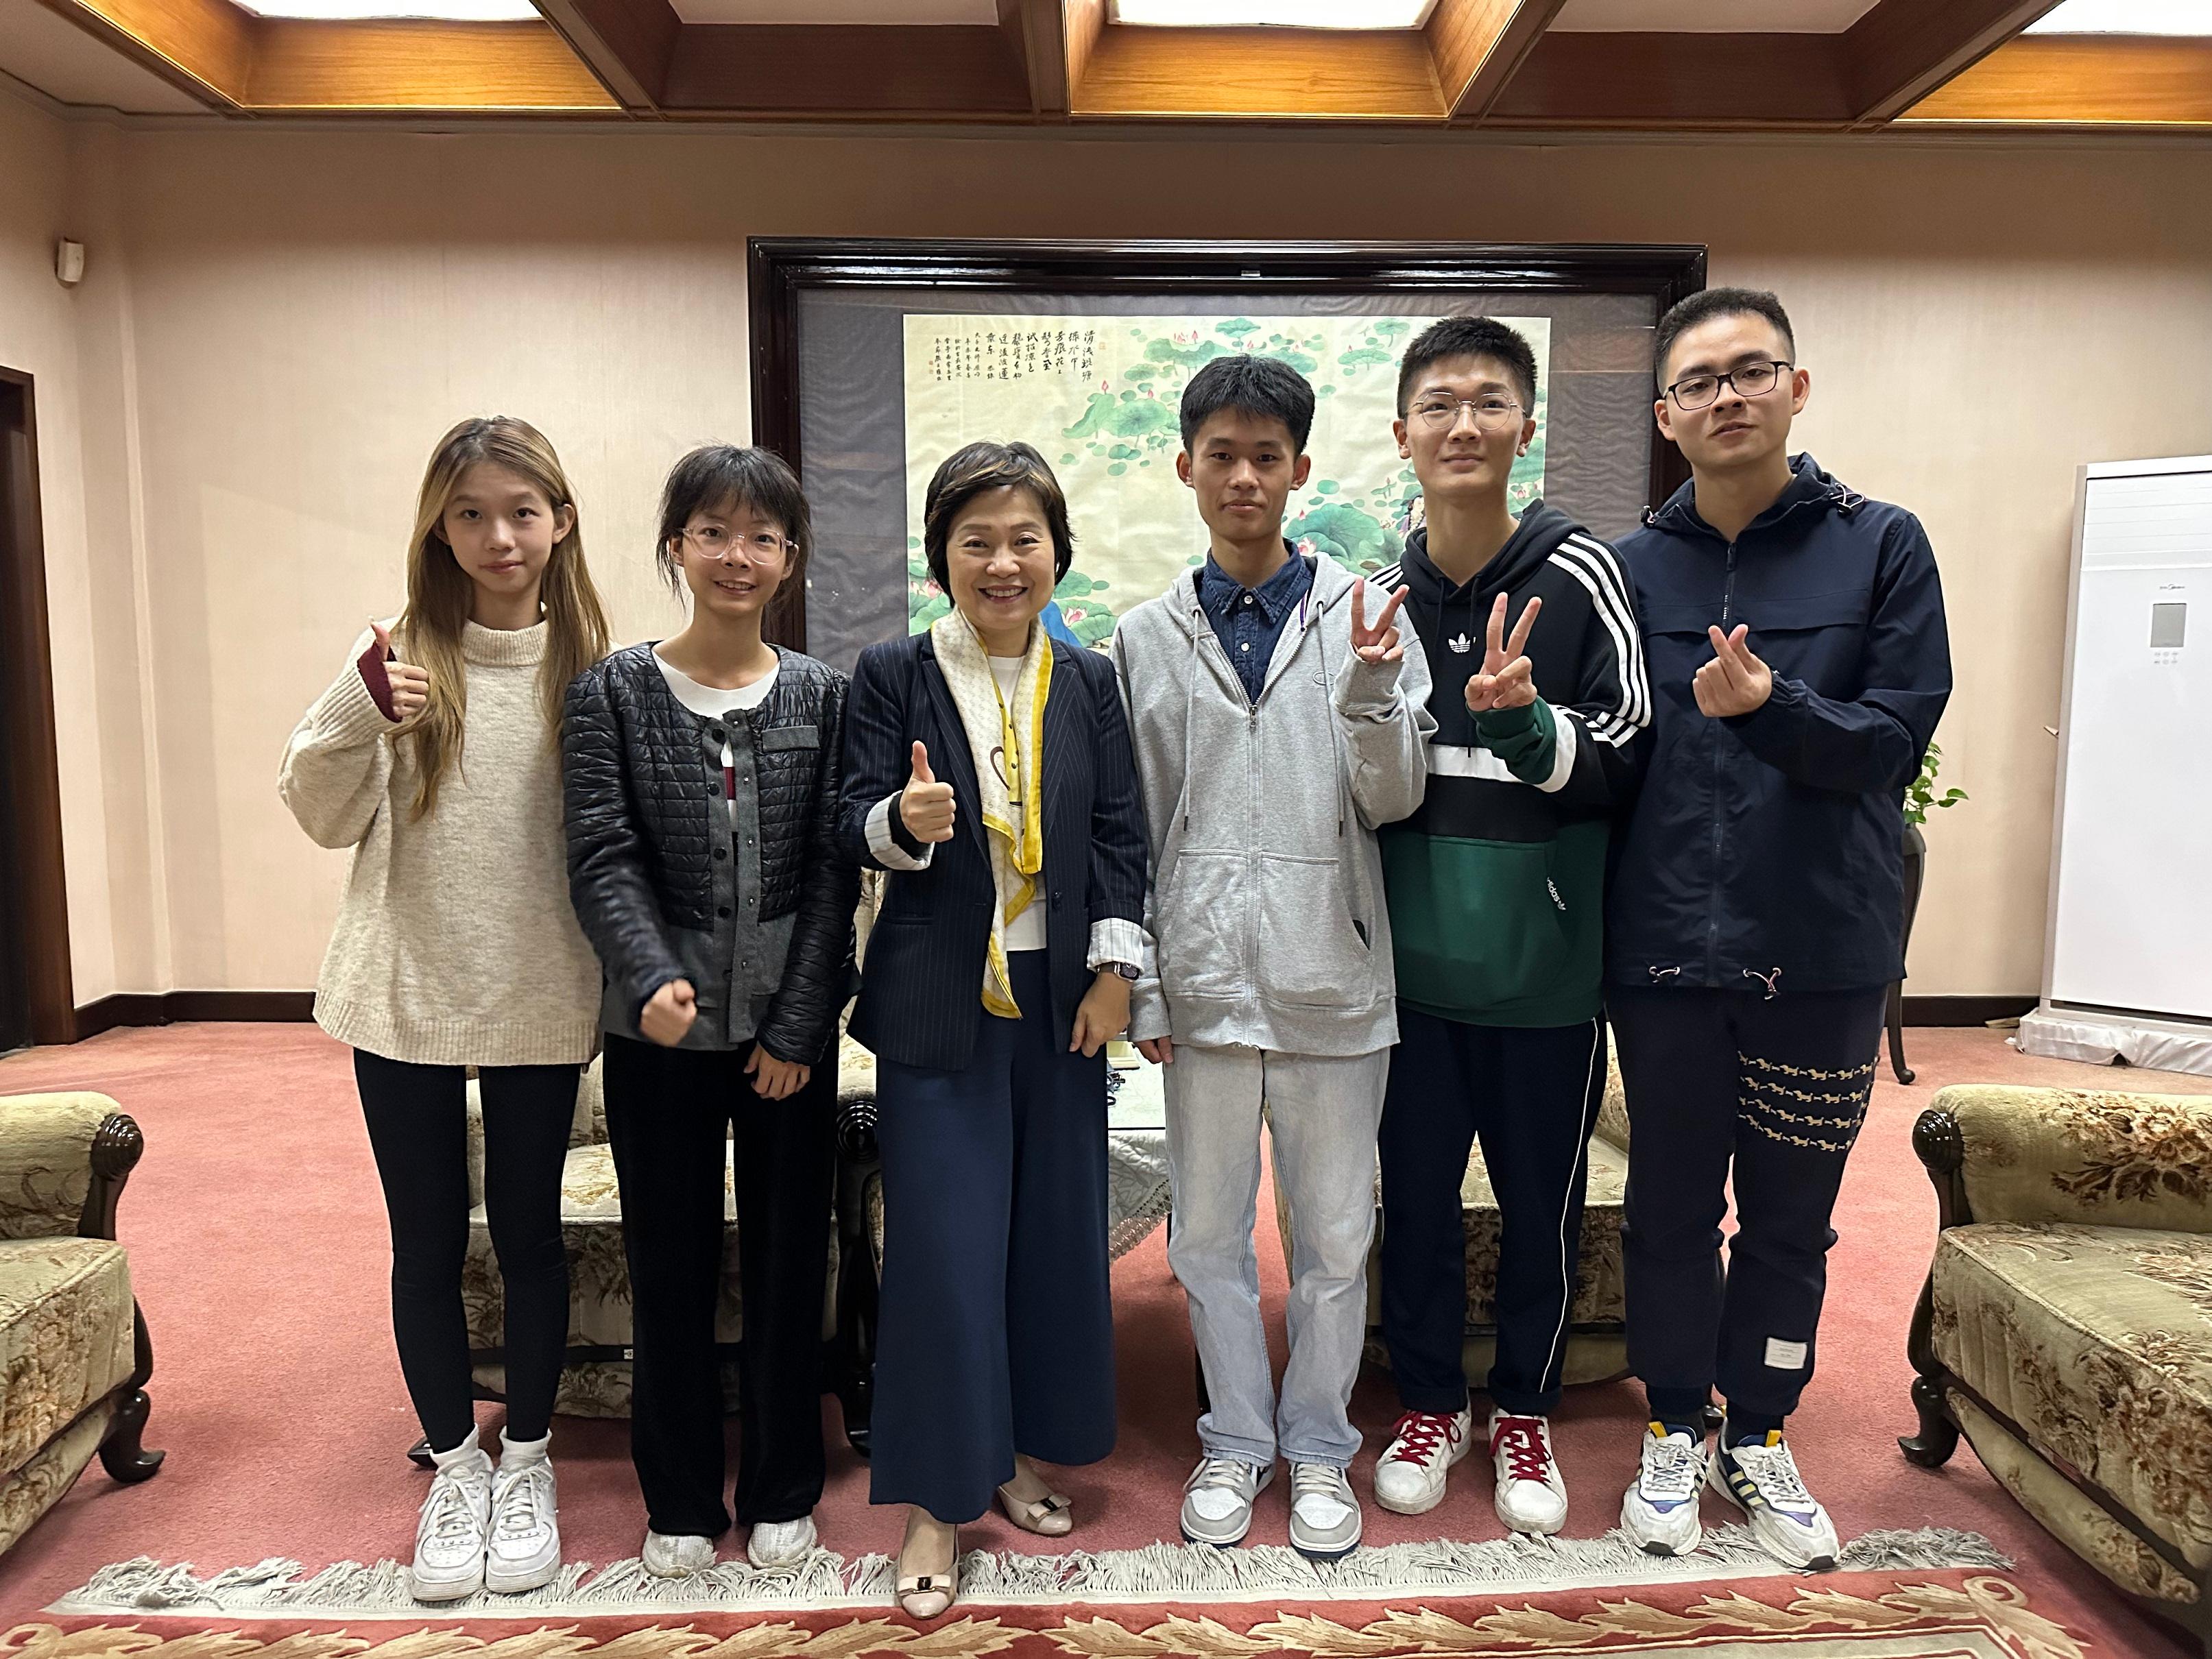 The Secretary for Education, Dr Choi Yuk-lin (third left), met Hong Kong students studying at Xi'an Jiaotong University during her visit to the university on October 8.